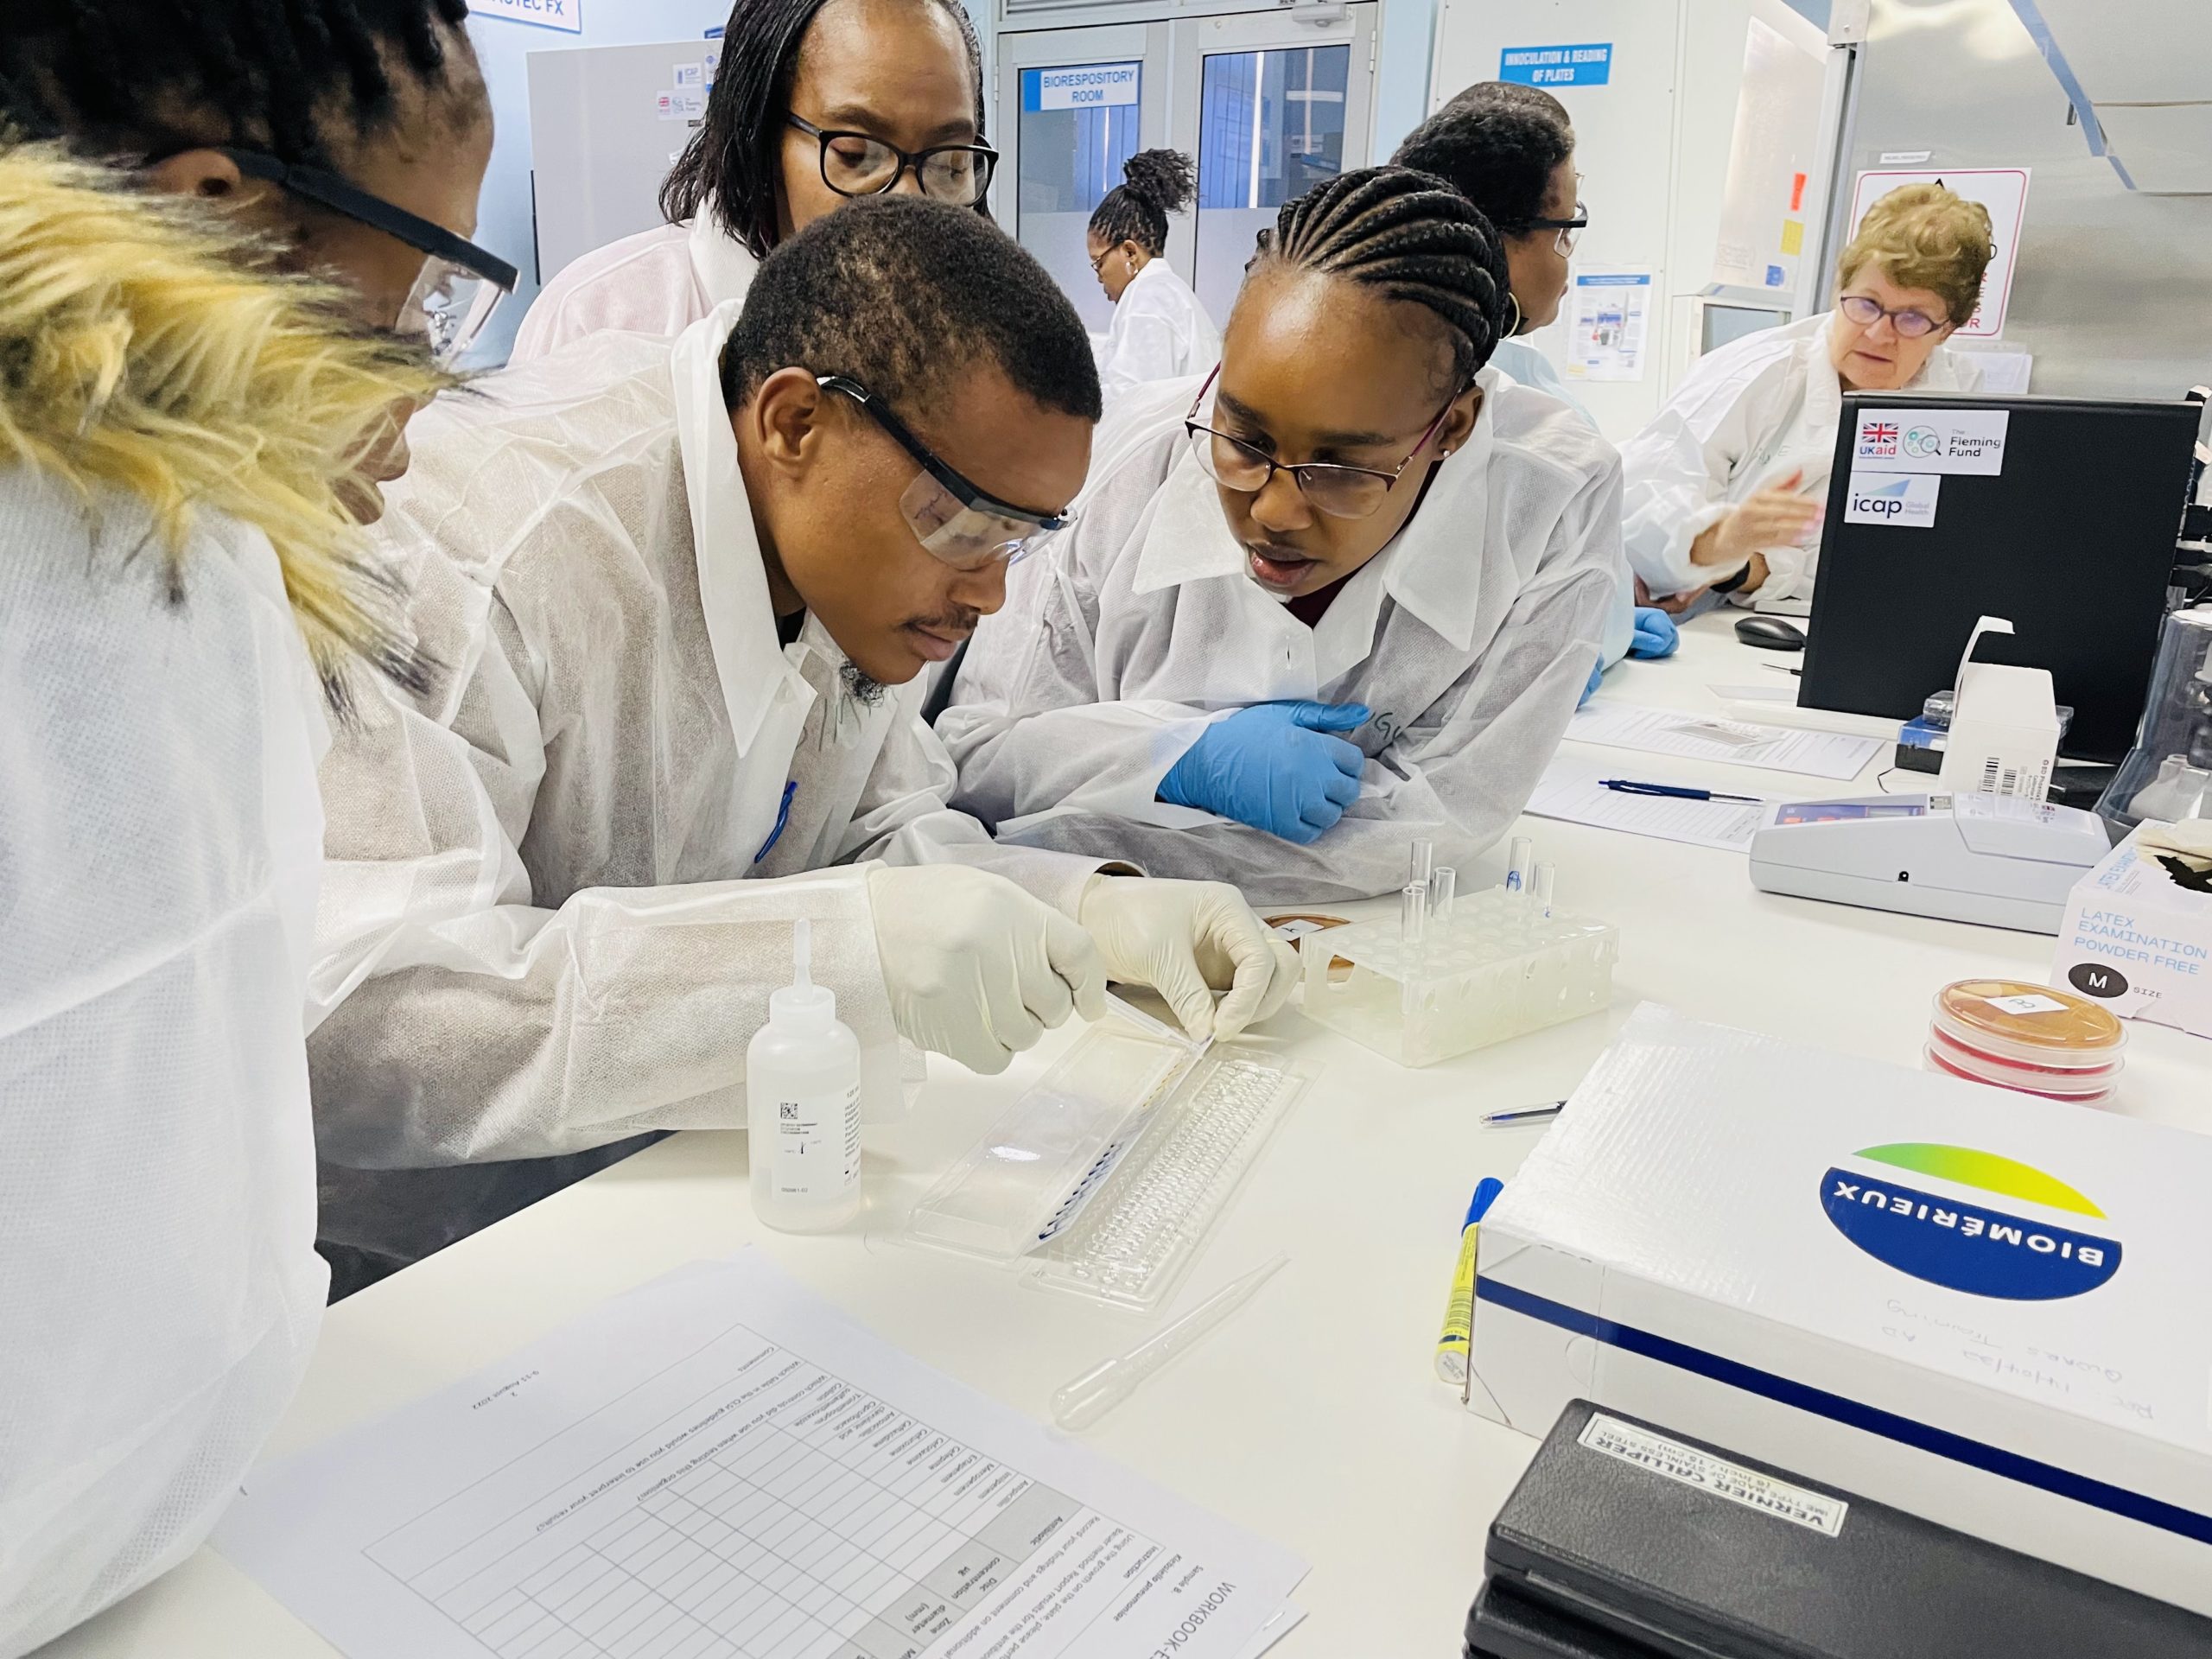 Fleming Fund regional grant, led by the African Society for Laboratory Medicine (ASLM), QWArS project microbiology professionals from Eswatini. Credit: ASLM.